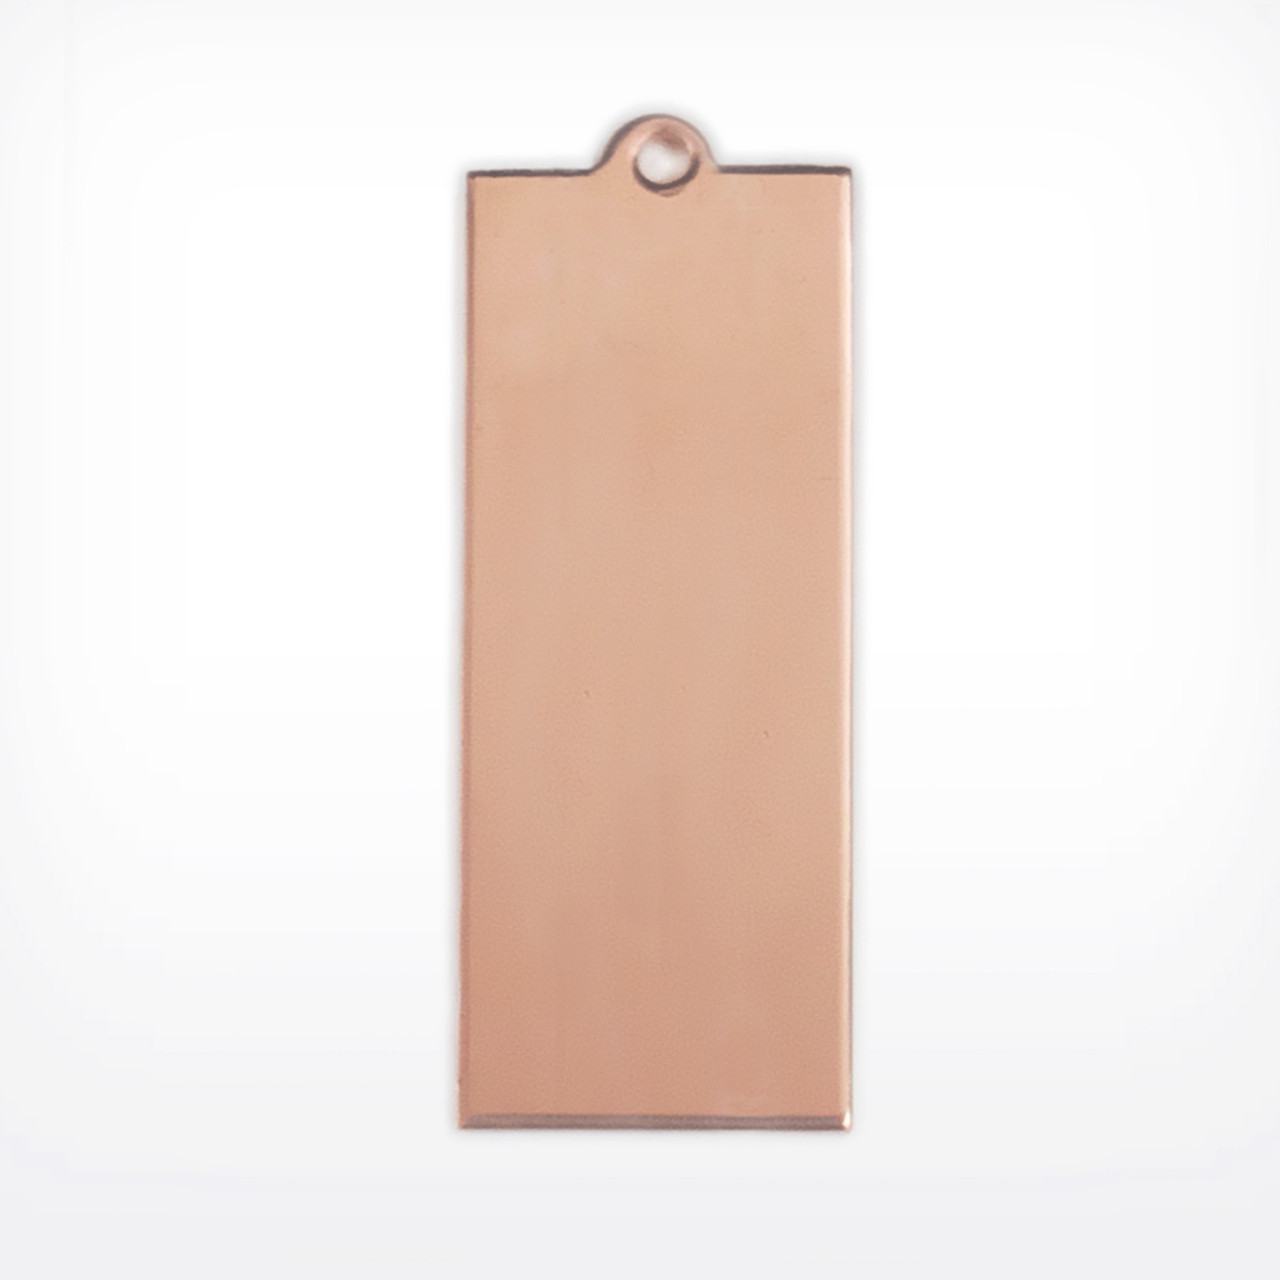 Copper Blank Rectangle Stamped Shape for Enamelling & Other Crafts